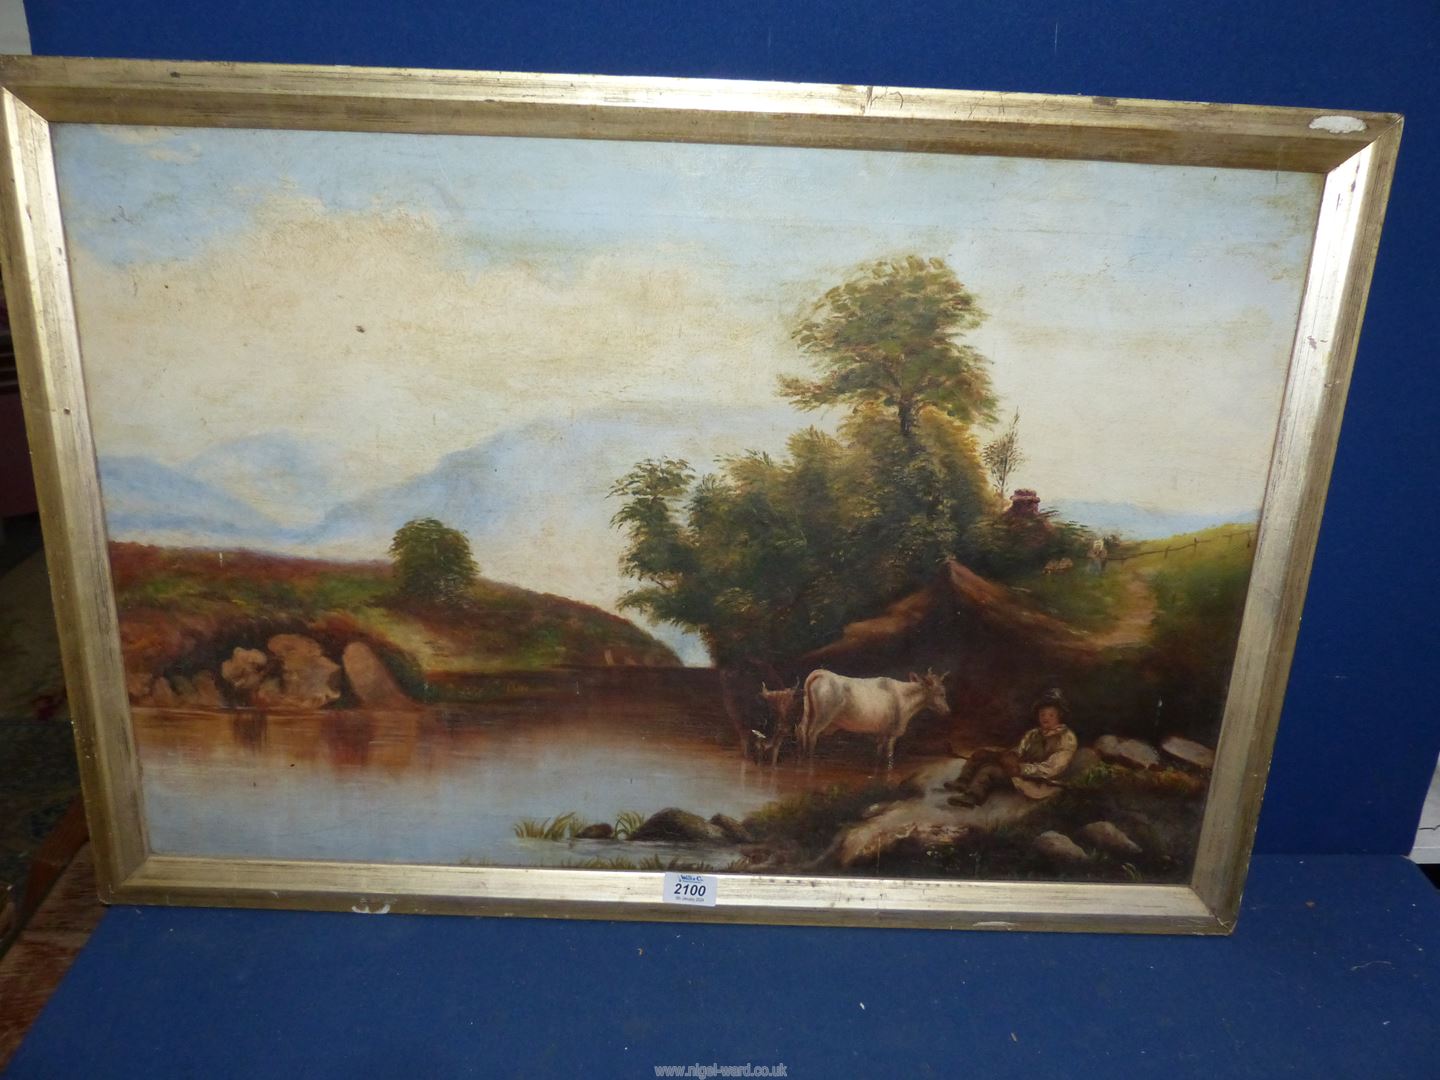 A framed Oil on canvas of cattle drinking from a river as a young cattle herder sits beneath the